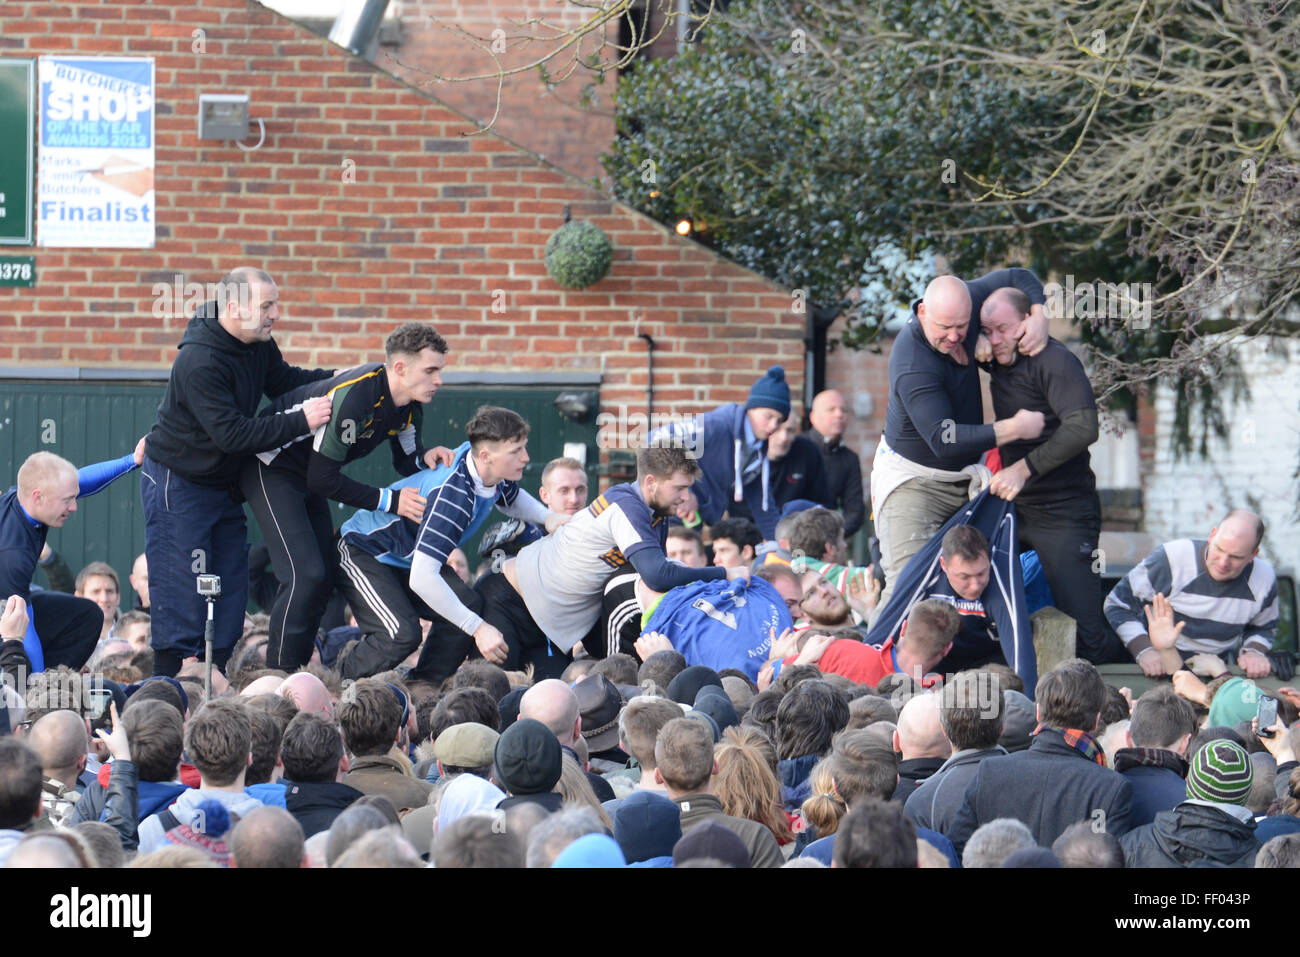 Ashbourne, Derbyshire, UK. 9th Feb, 2016. Players battle for the ball in the hug. Thousands join in the Shrovetide football derby. The goals are three miles apart and the game takes place over two eight hour periods Shrove Tuesday and Ash Wednesday. Credit:  Nigel Spooner/Alamy Live News Stock Photo